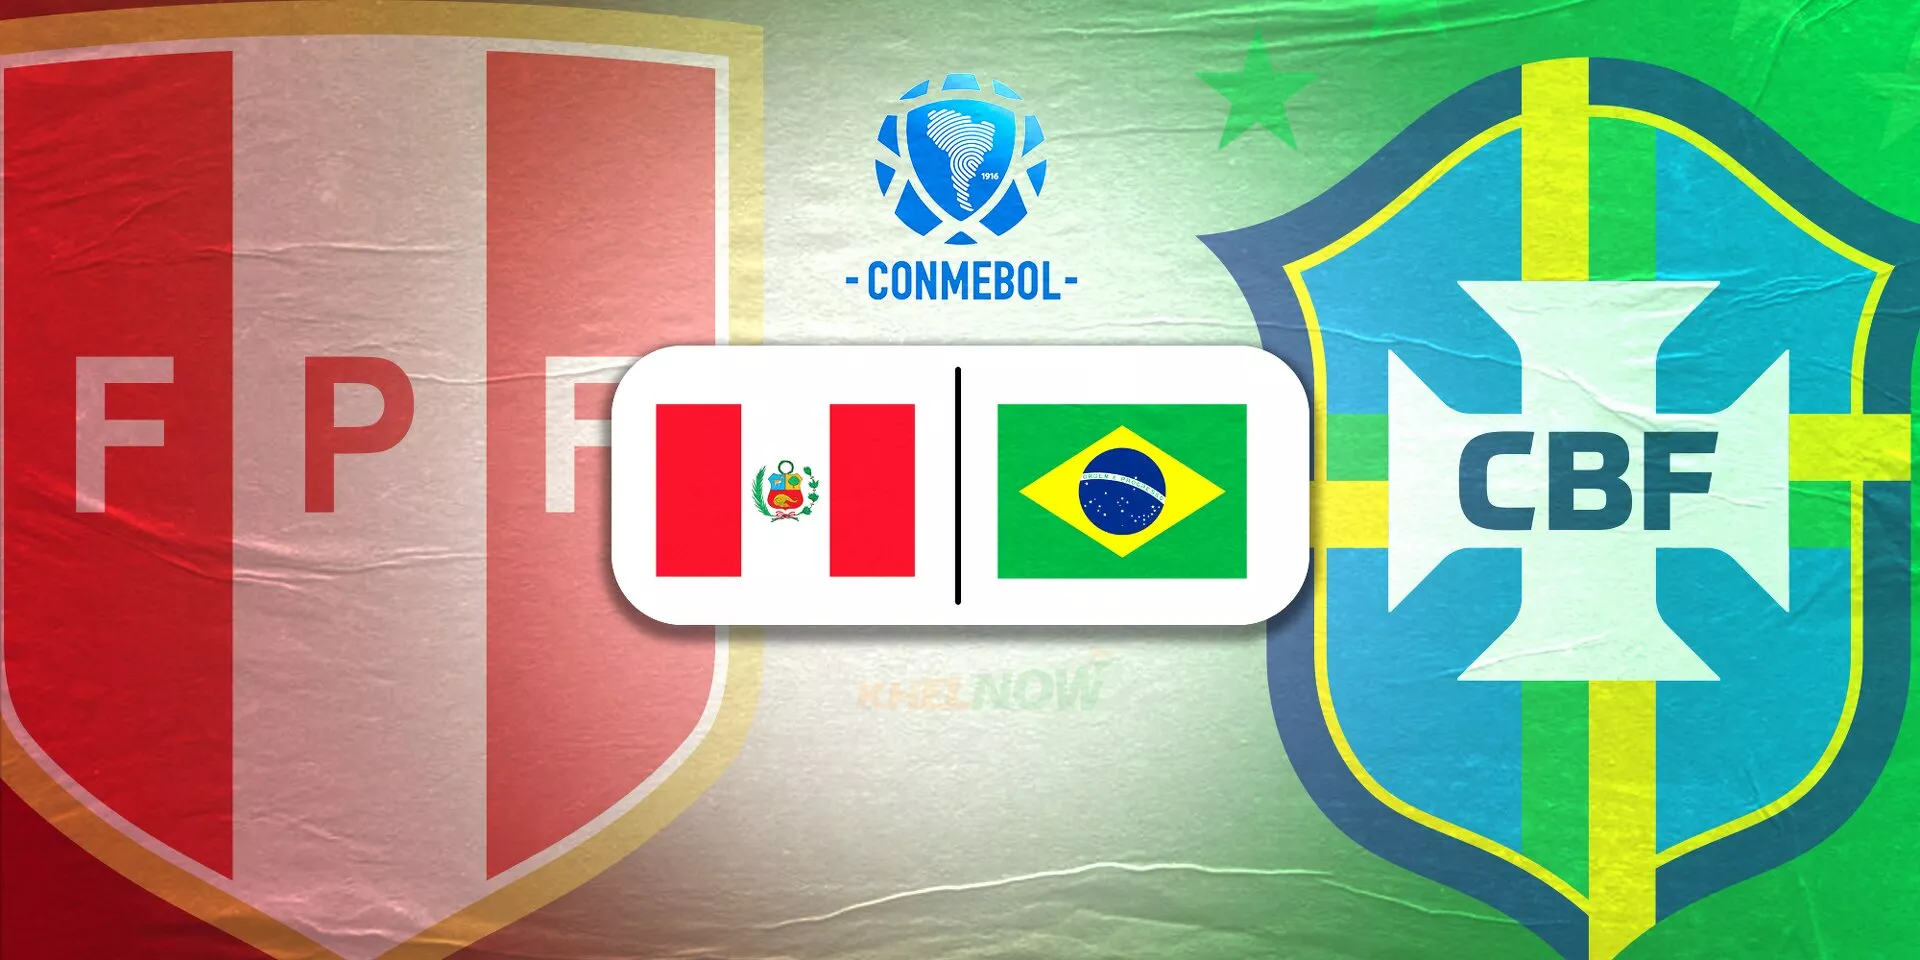 Peru vs Brazil: Where and how to watch?